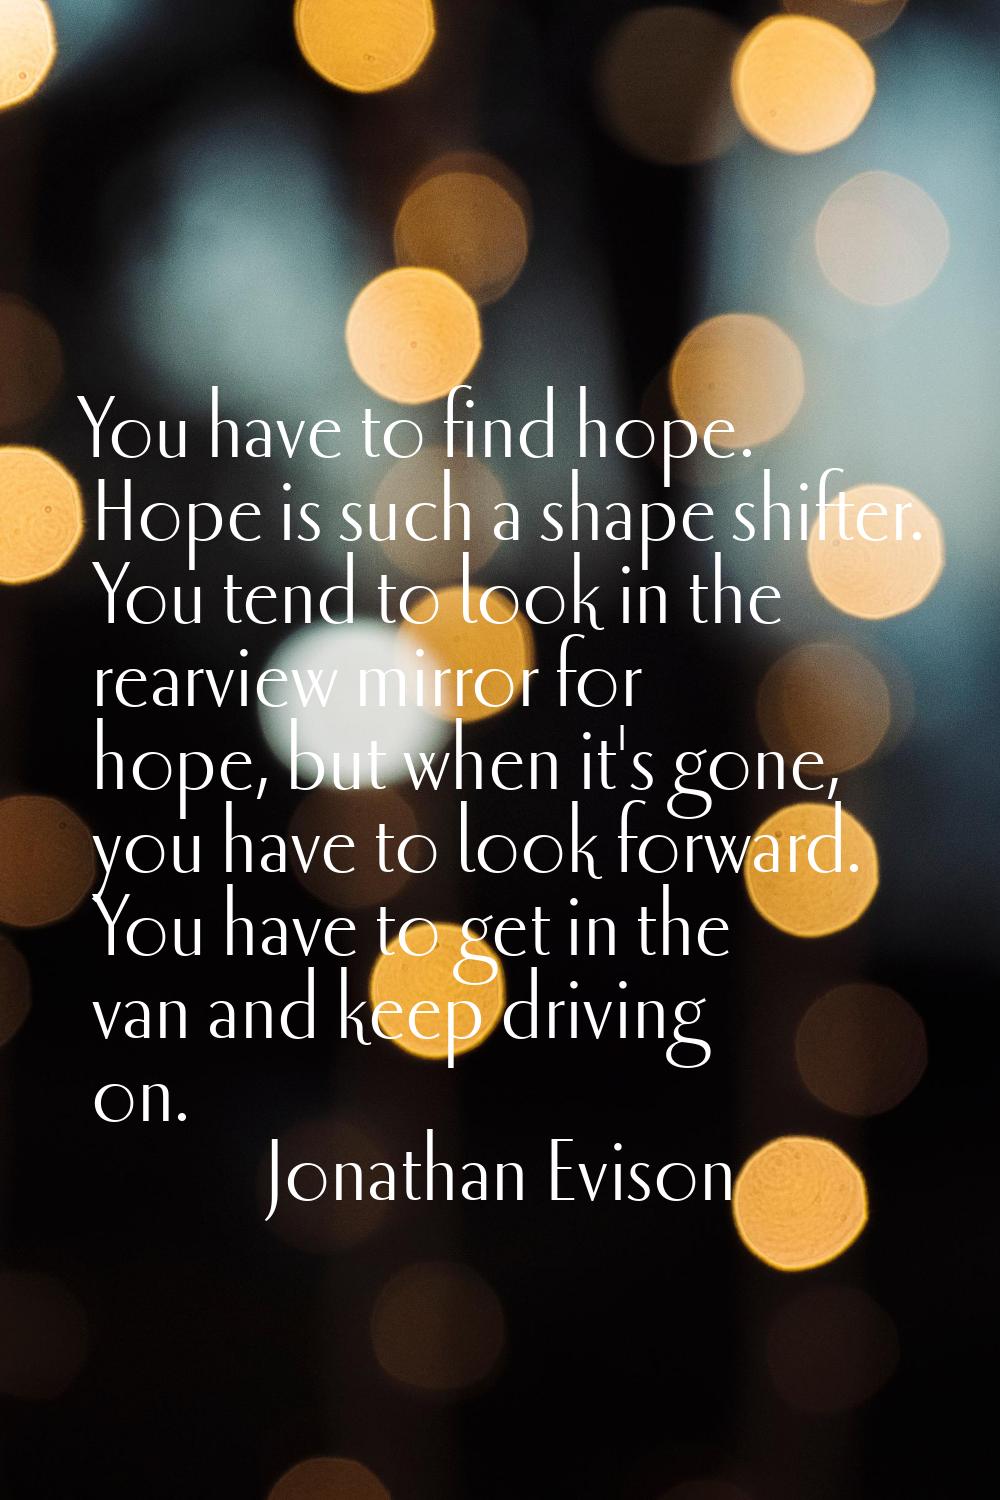 You have to find hope. Hope is such a shape shifter. You tend to look in the rearview mirror for ho